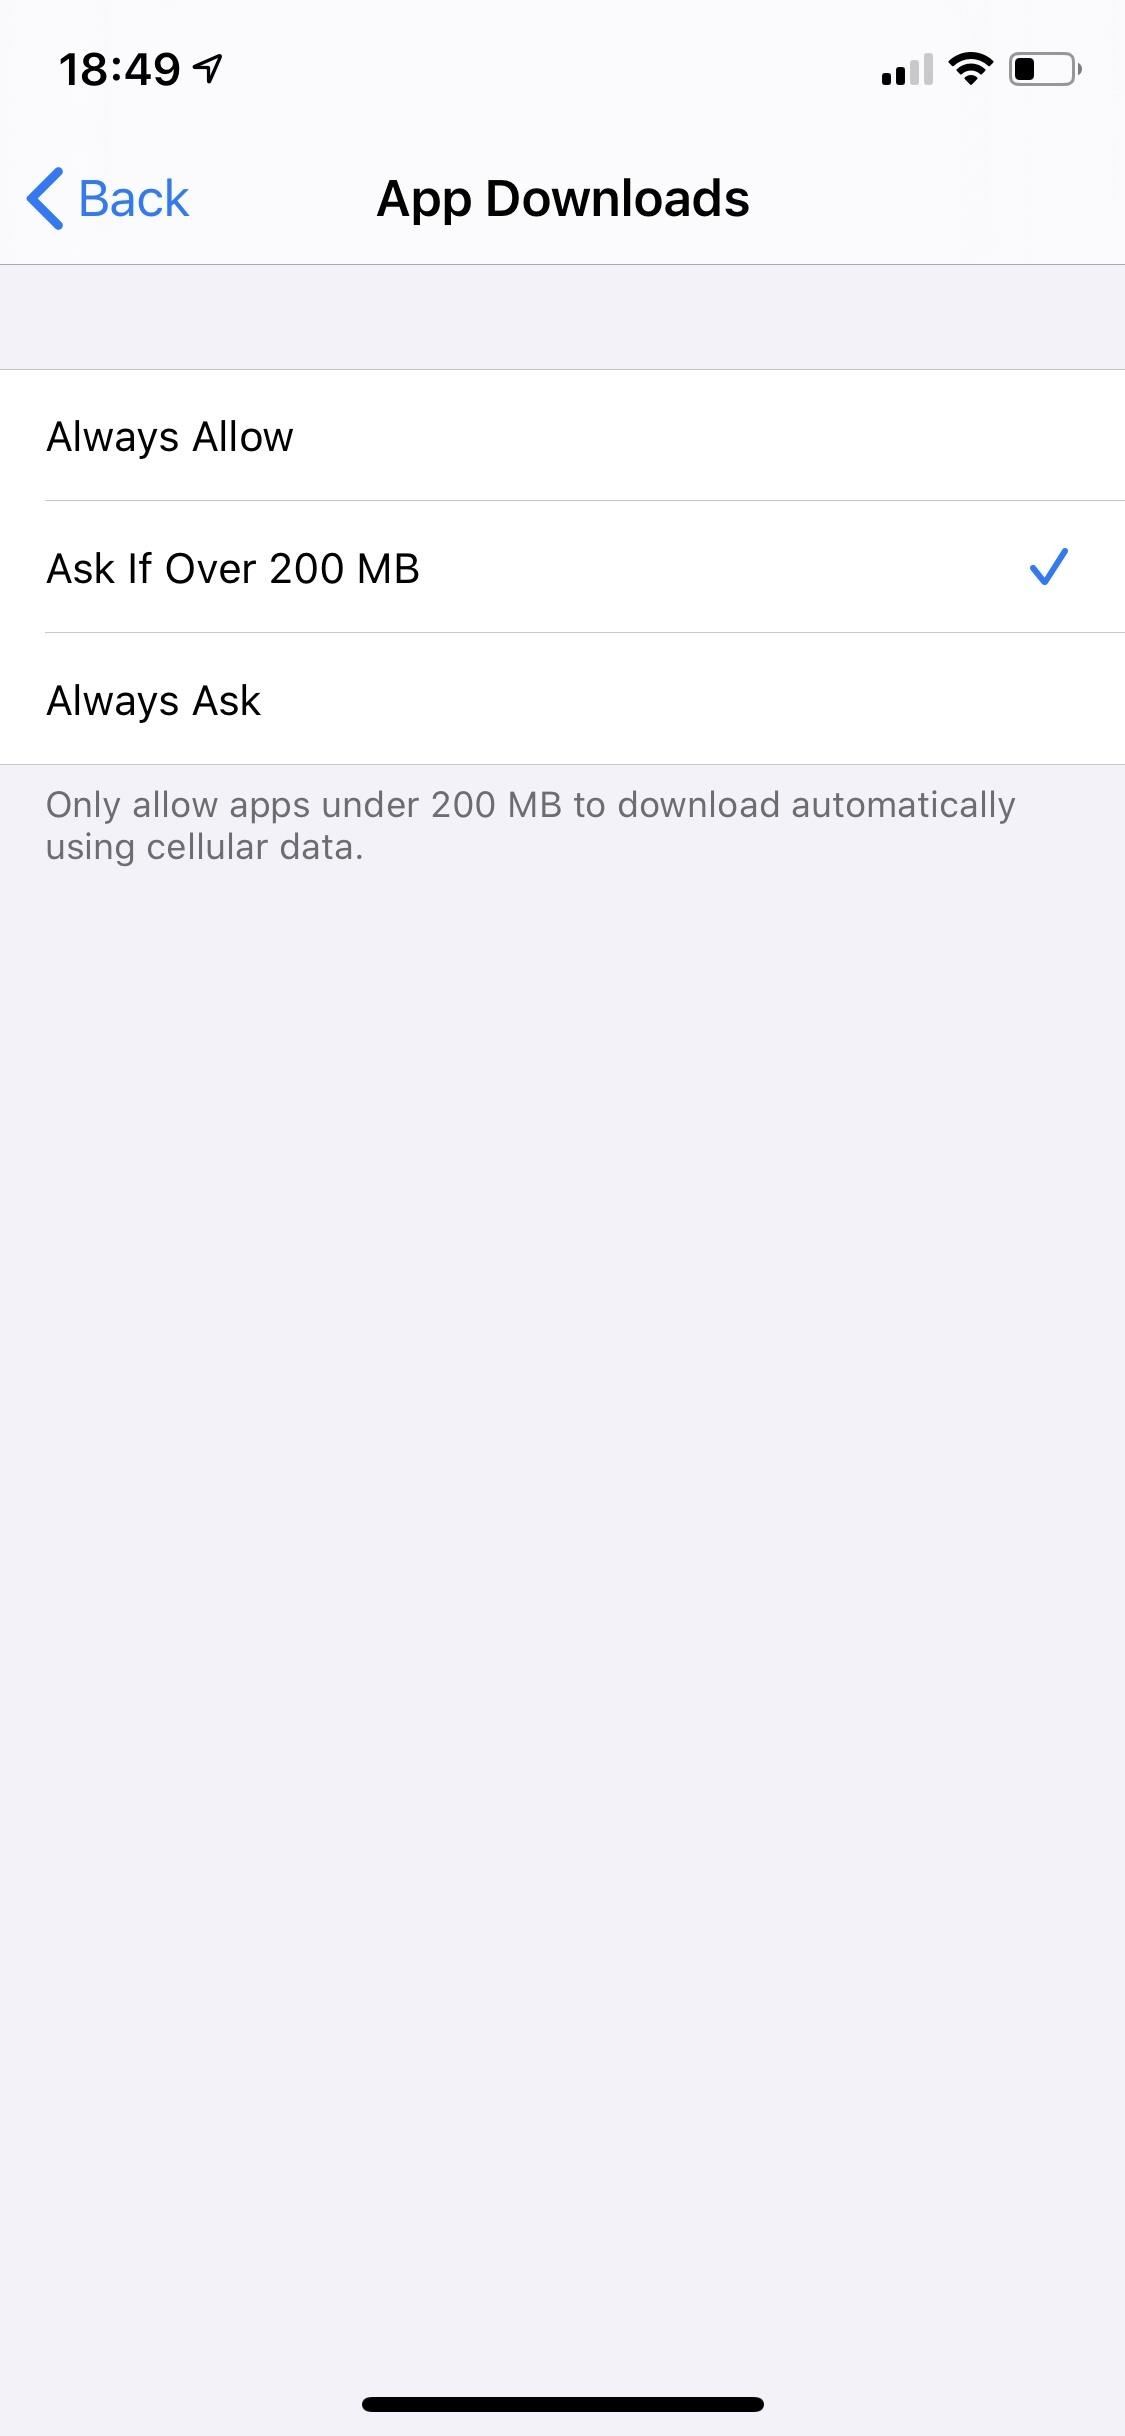 Download Apps of Any Size Using Cellular Data on Your iPhone in iOS 13 — Without Any Warnings